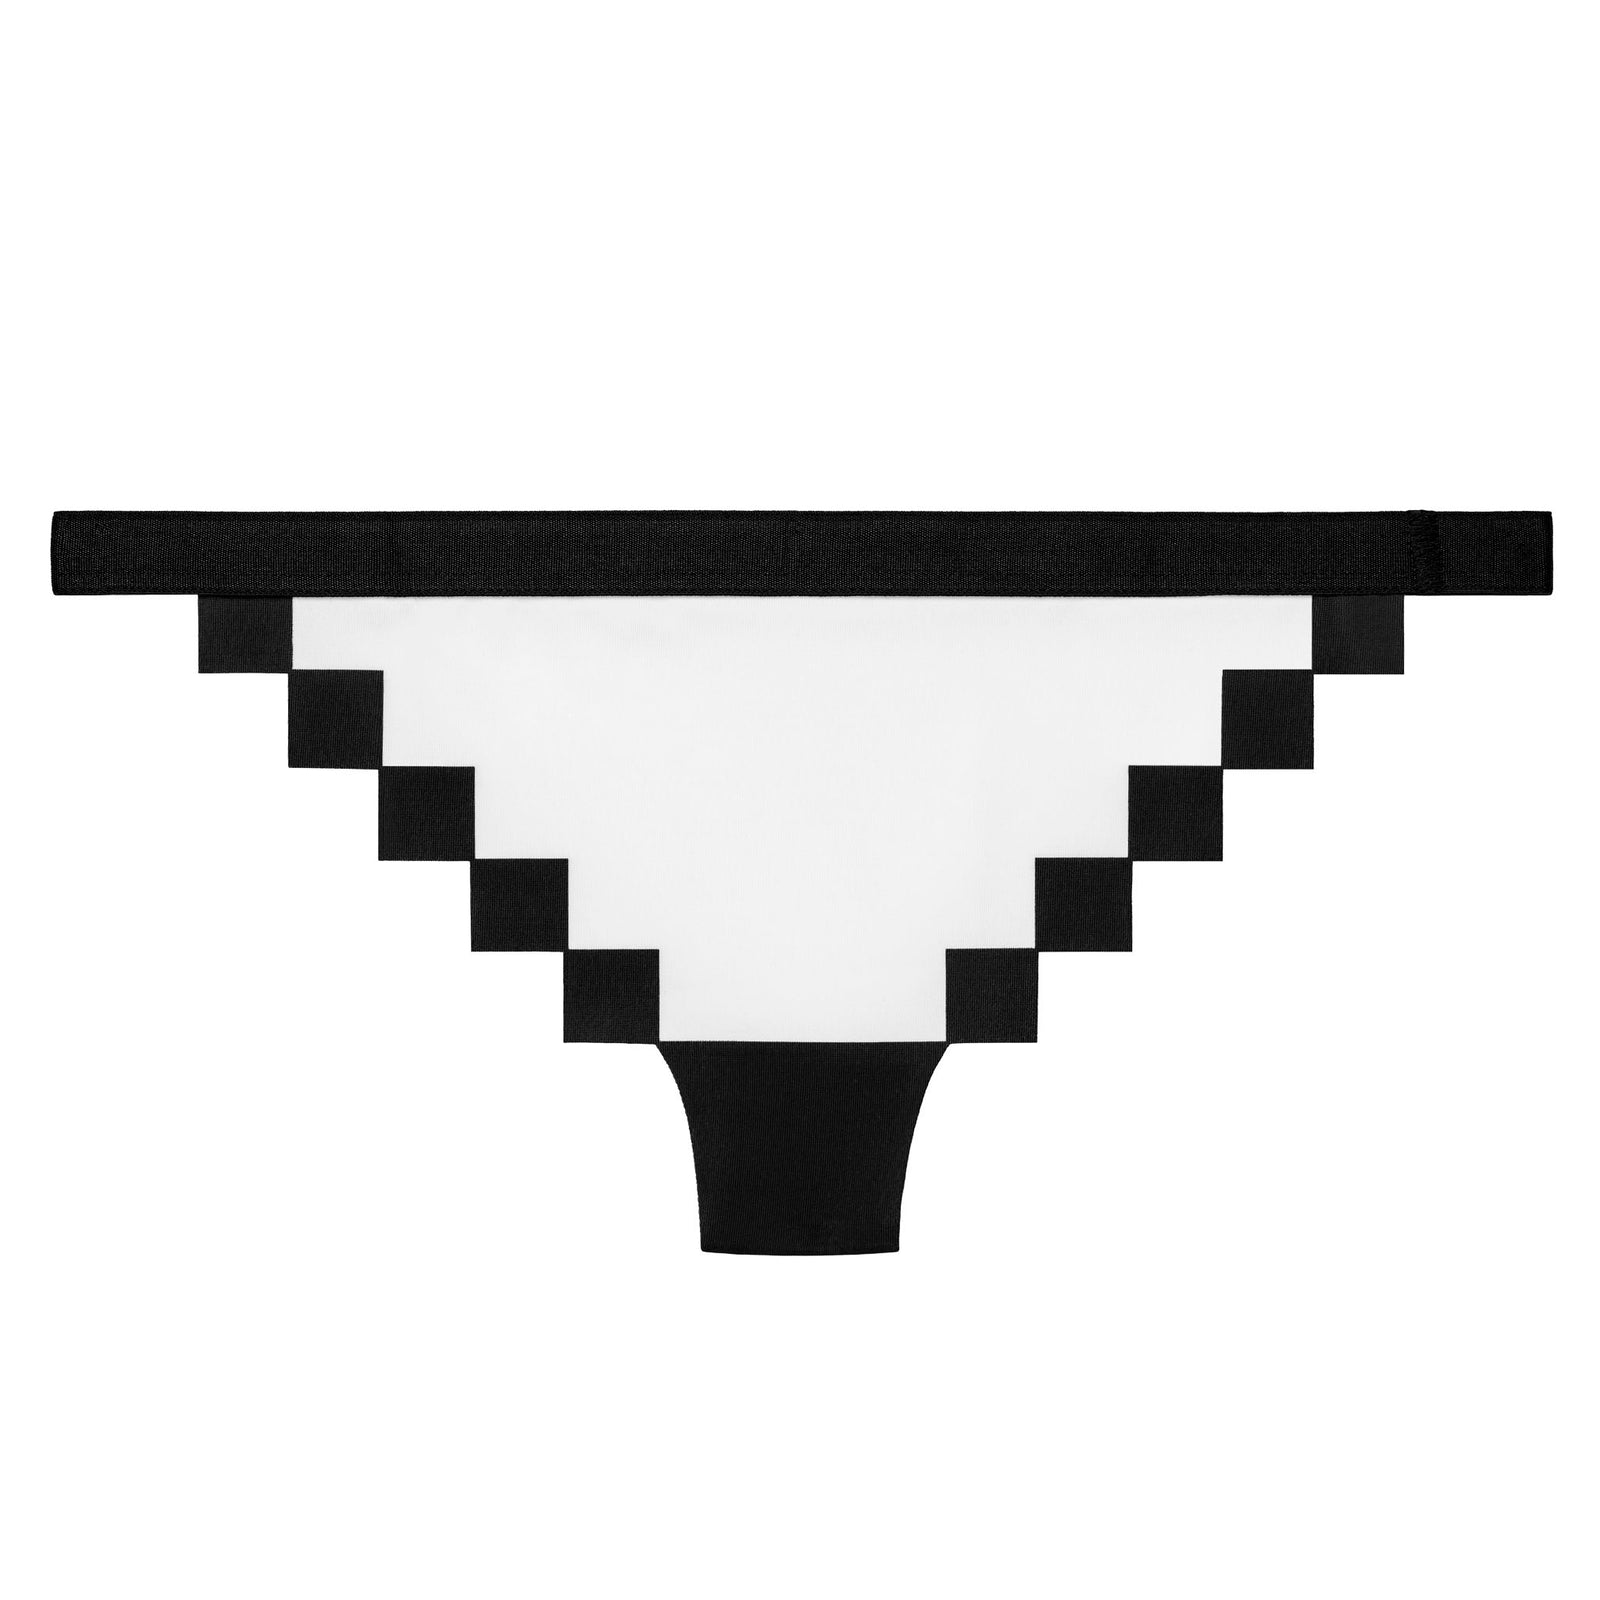 NSFW: A New Brand is Launching Pixelated Panties - Brit + Co